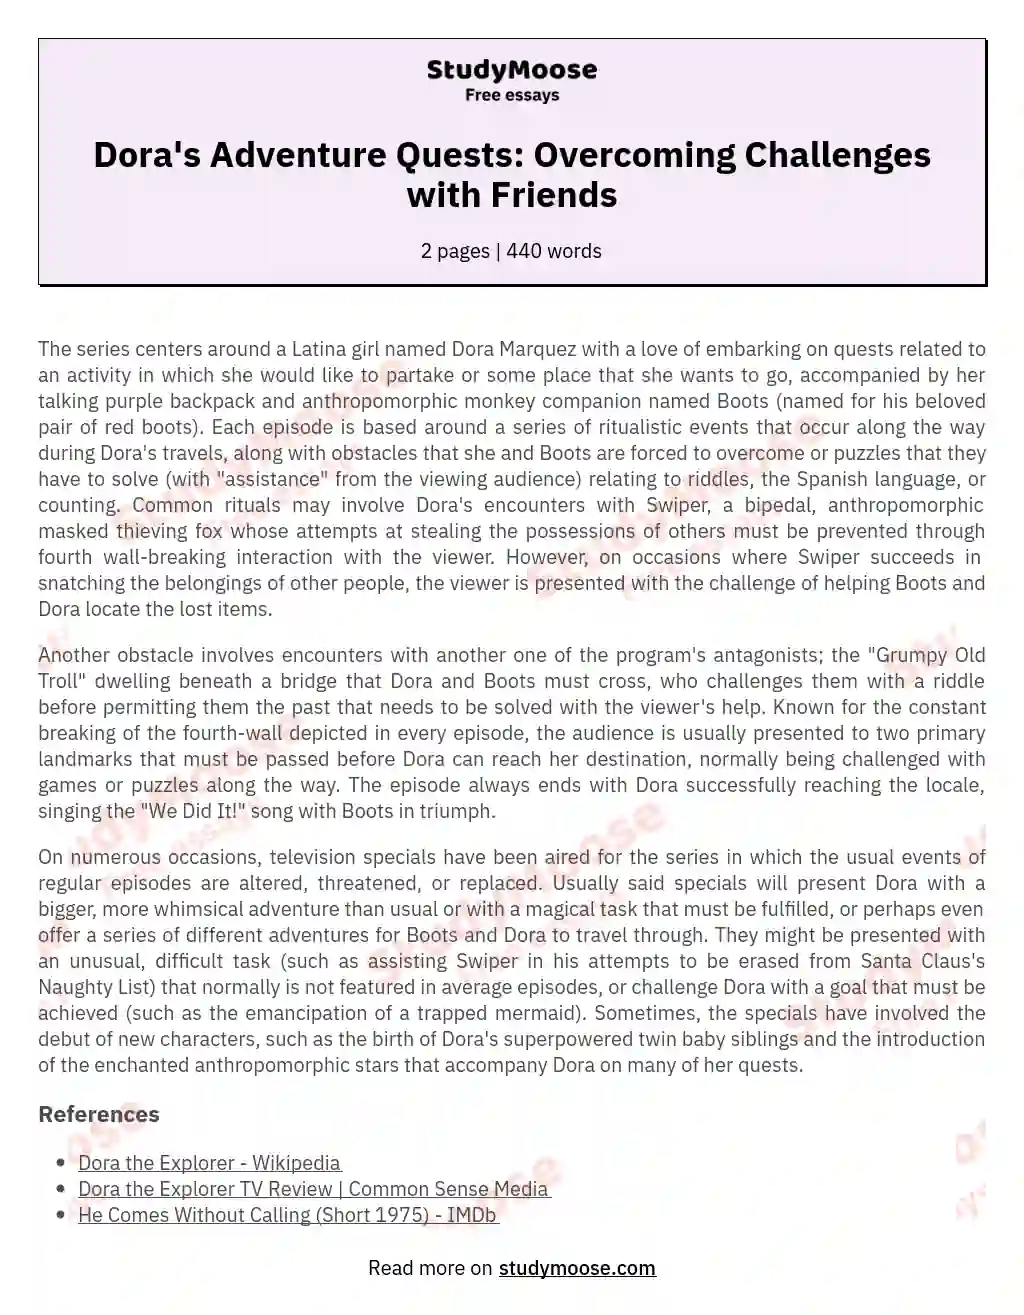 Dora's Adventure Quests: Overcoming Challenges with Friends Free Essay  Example